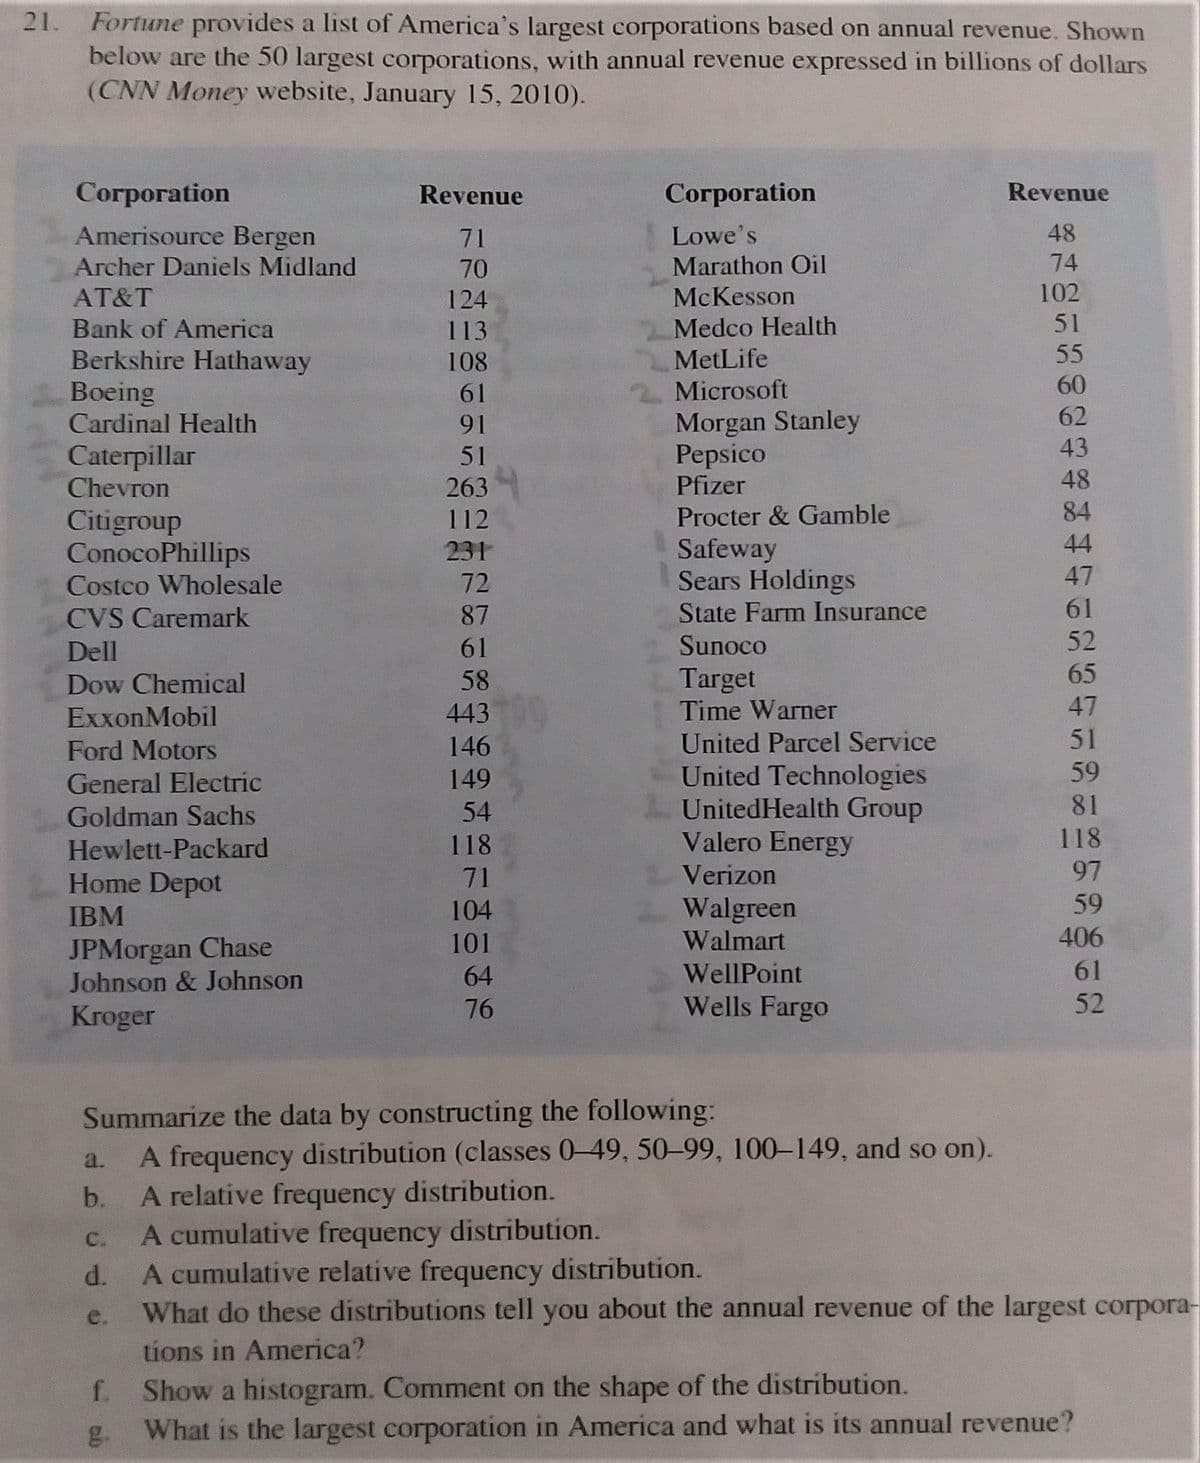 Fortune provides a list of America's largest corporations based on annual revenue. Shown
below are the 50 largest corporations, with annual revenue expressed in billions of dollars
(CNN Money website, January 15, 2010).
21.
Согрогаtion
Revenue
Corporation
Revenue
Amerisource Bergen
Lowe's
Marathon Oil
48
71
Archer Daniels Midland
70
74
AT&T
124
McKesson
102
Bank of America
113
Medco Health
51
55
Berkshire Hathaway
Boeing
Cardinal Health
MetLife
Microsoft
108
61
60
62
Morgan Stanley
Pepsico
Pfizer
91
43
Caterpillar
Chevron
51
48
263
112
Procter & Gamble
84
Citigroup
ConocoPhillips
Costco Wholesale
44
Safeway
Sears Holdings
State Farm Insurance
231
72
47
87
61
CVS Caremark
Dell
61
Sunoco
52
65
Target
Time Warner
Dow Chemical
58
ExxonMobil
443
47
51
59
United Parcel Service
United Technologies
UnitedHealth Group
Valero Energy
Ford Motors
146
General Electric
149
54
81
Goldman Sachs
Hewlett-Packard
Home Depot
118
118
71
rizon
97
59
Walgreen
Walmart
IBM
104
406
JPMorgan Chase
Johnson & Johnson
101
64
WellPoint
61
Kroger
76
Wells Fargo
52
Summarize the data by constructing the following:
A frequency distribution (classes 0-49, 50-99, 100-149, and so on).
A relative frequency distribution.
A cumulative frequency distribution.
A cumulative relative frequency distribution.
What do these distributions tell you about the annual revenue of the largest corpora-
a.
b.
C.
d.
e.
tions in America?
Show a histogram. Comment on the shape of the distribution.
What is the largest corporation in America and what is its annual revenue?
f.
